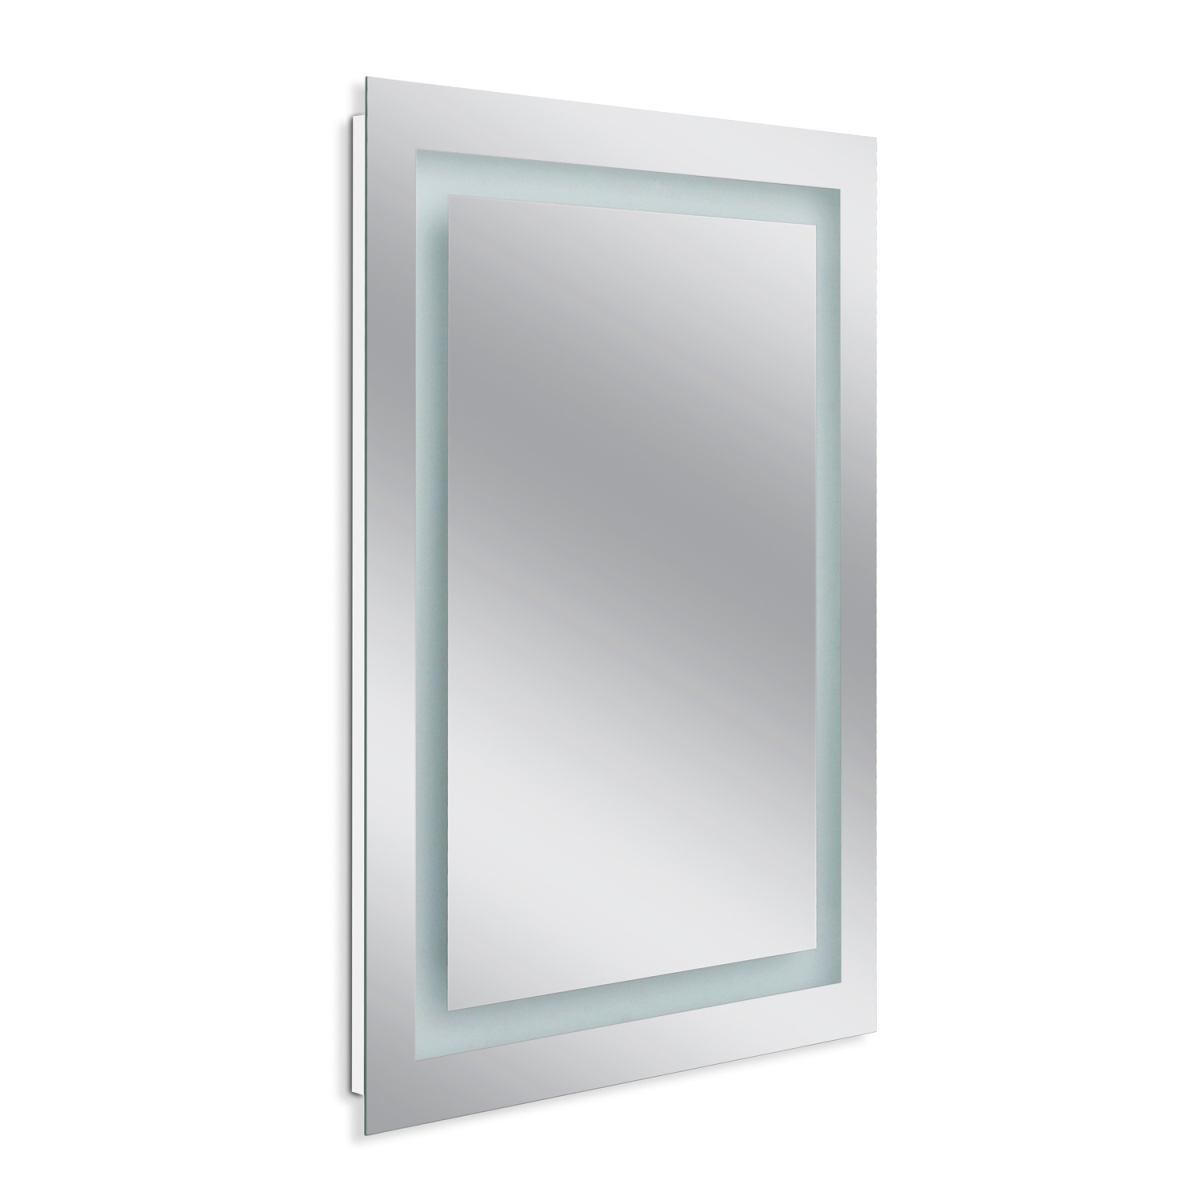 8103 26 X 32 In. Led Wall Mirror - Rectangle